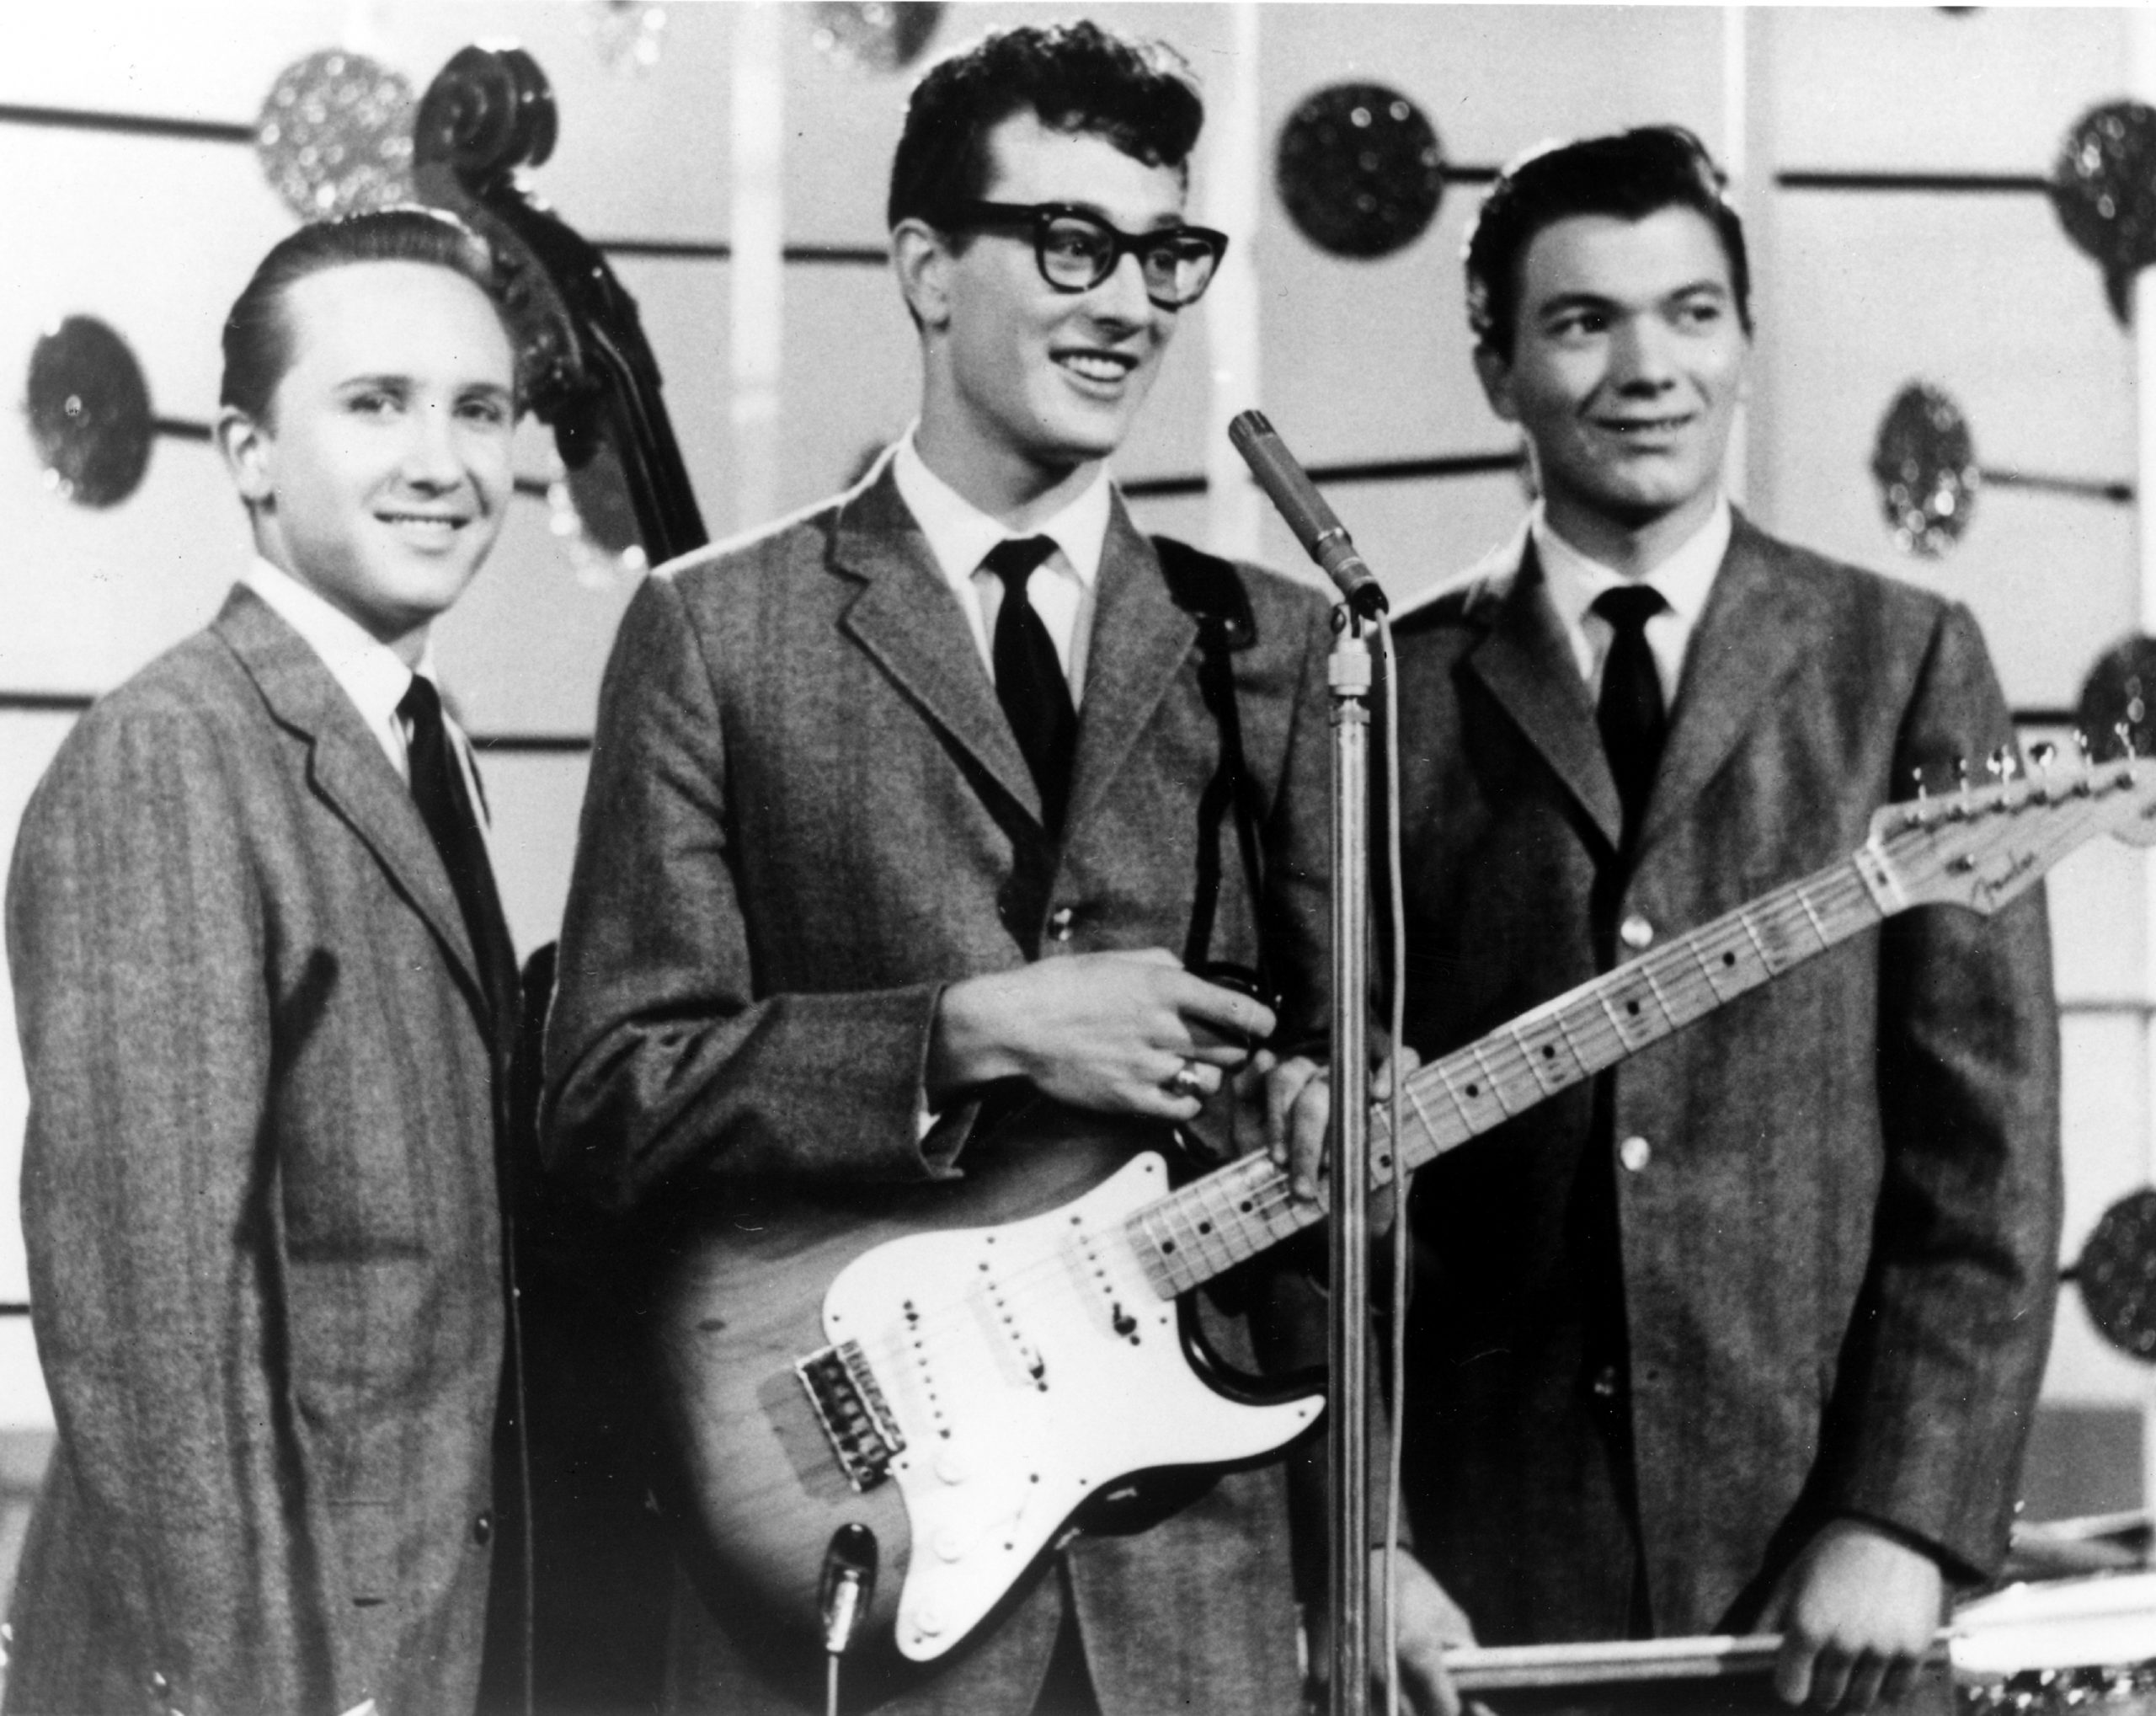 The Day The Music Died Buddy Holly Died In A Plane Crash On Feb 3 1959